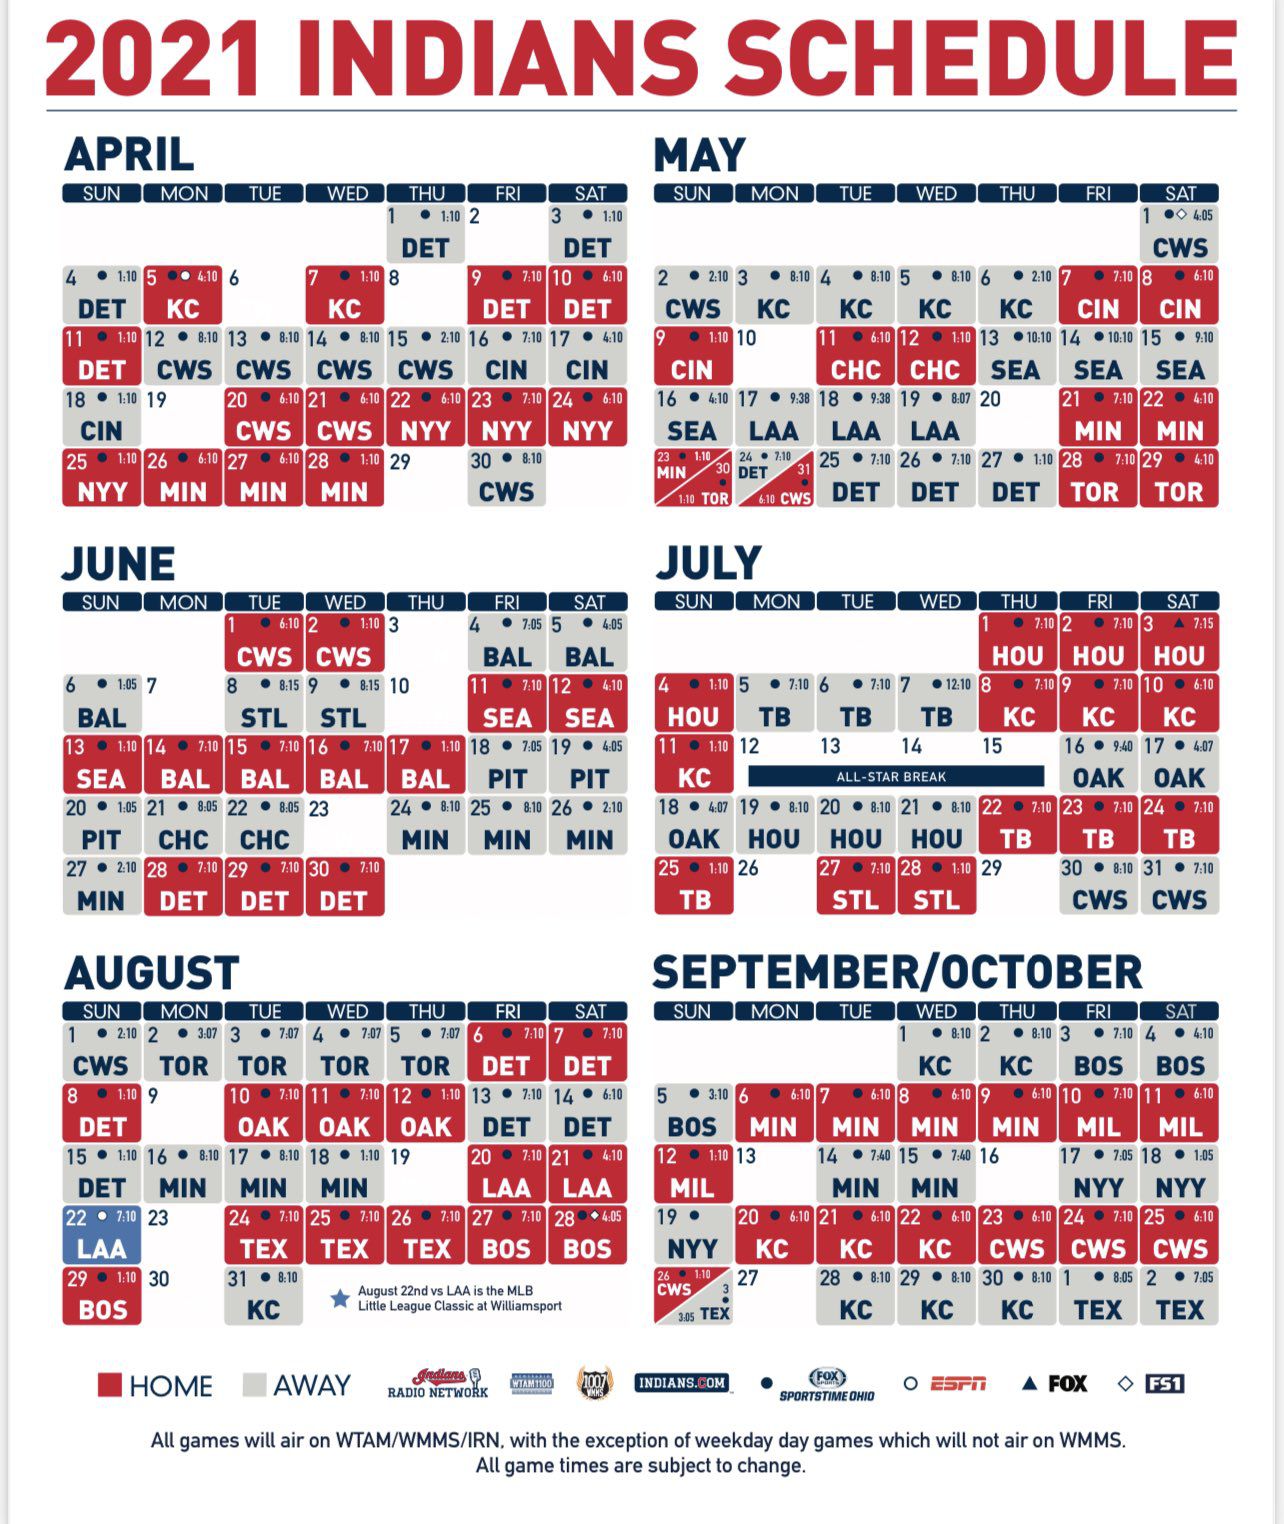 Indians 2022 Schedule Cleveland Indians 2021 Schedule Features April 5 Home Opener, Aug. 22  Matchup Vs. Angels In Williamsport, Pa. - Cleveland.com